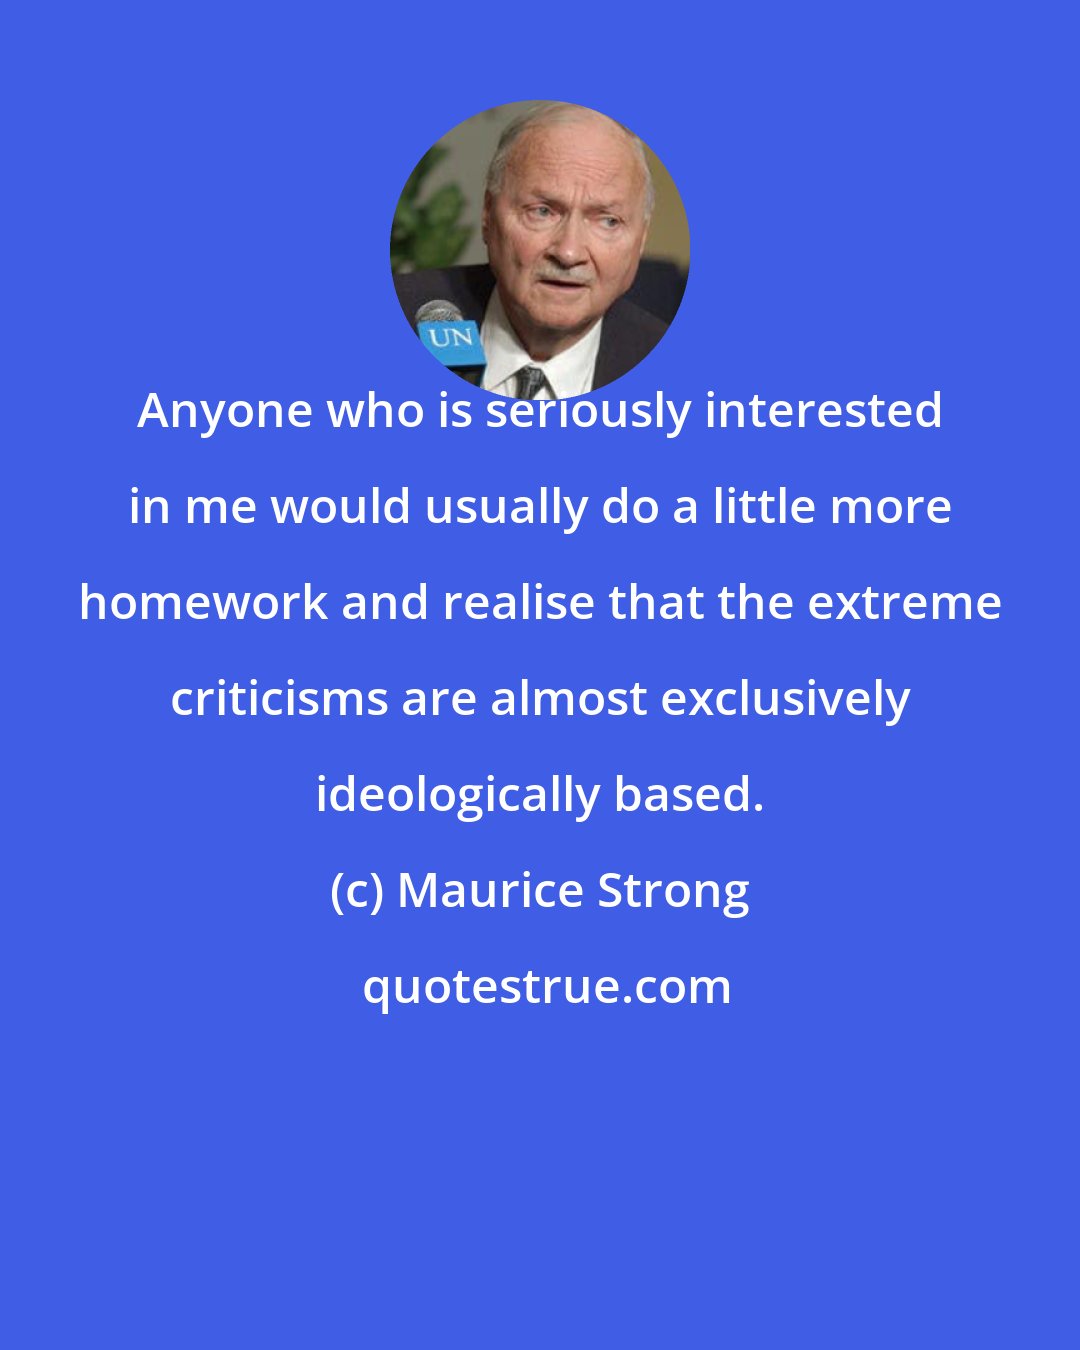 Maurice Strong: Anyone who is seriously interested in me would usually do a little more homework and realise that the extreme criticisms are almost exclusively ideologically based.